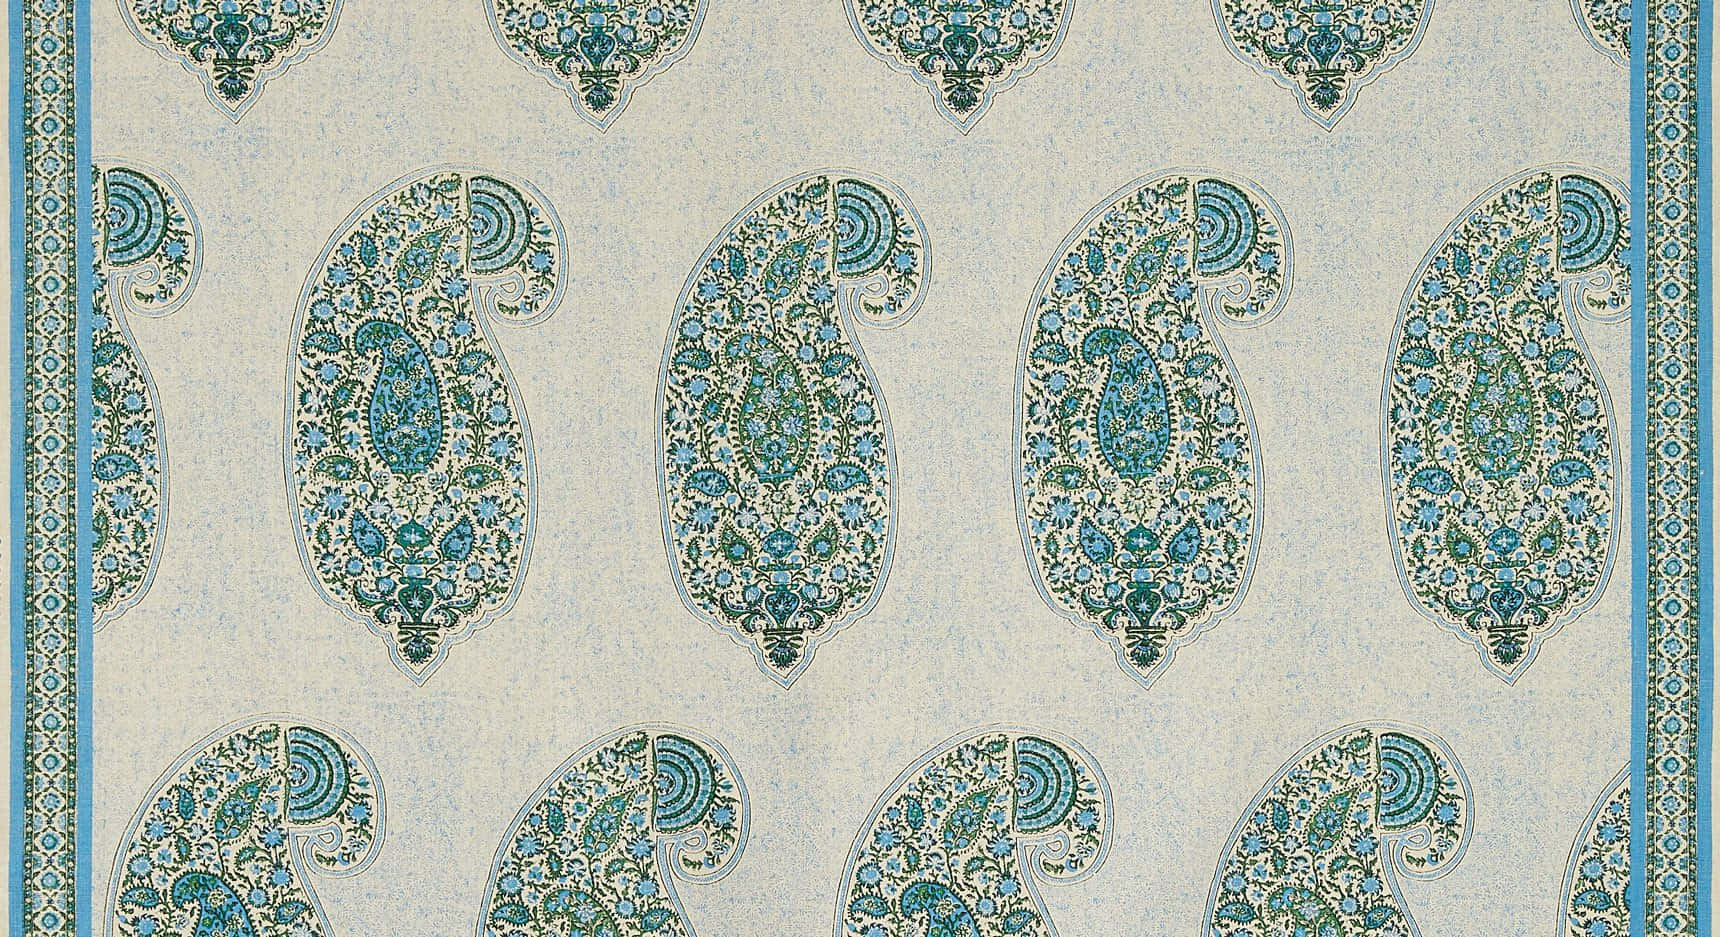 Green Paisley Pattern On Isfahan Textile Wallpaper